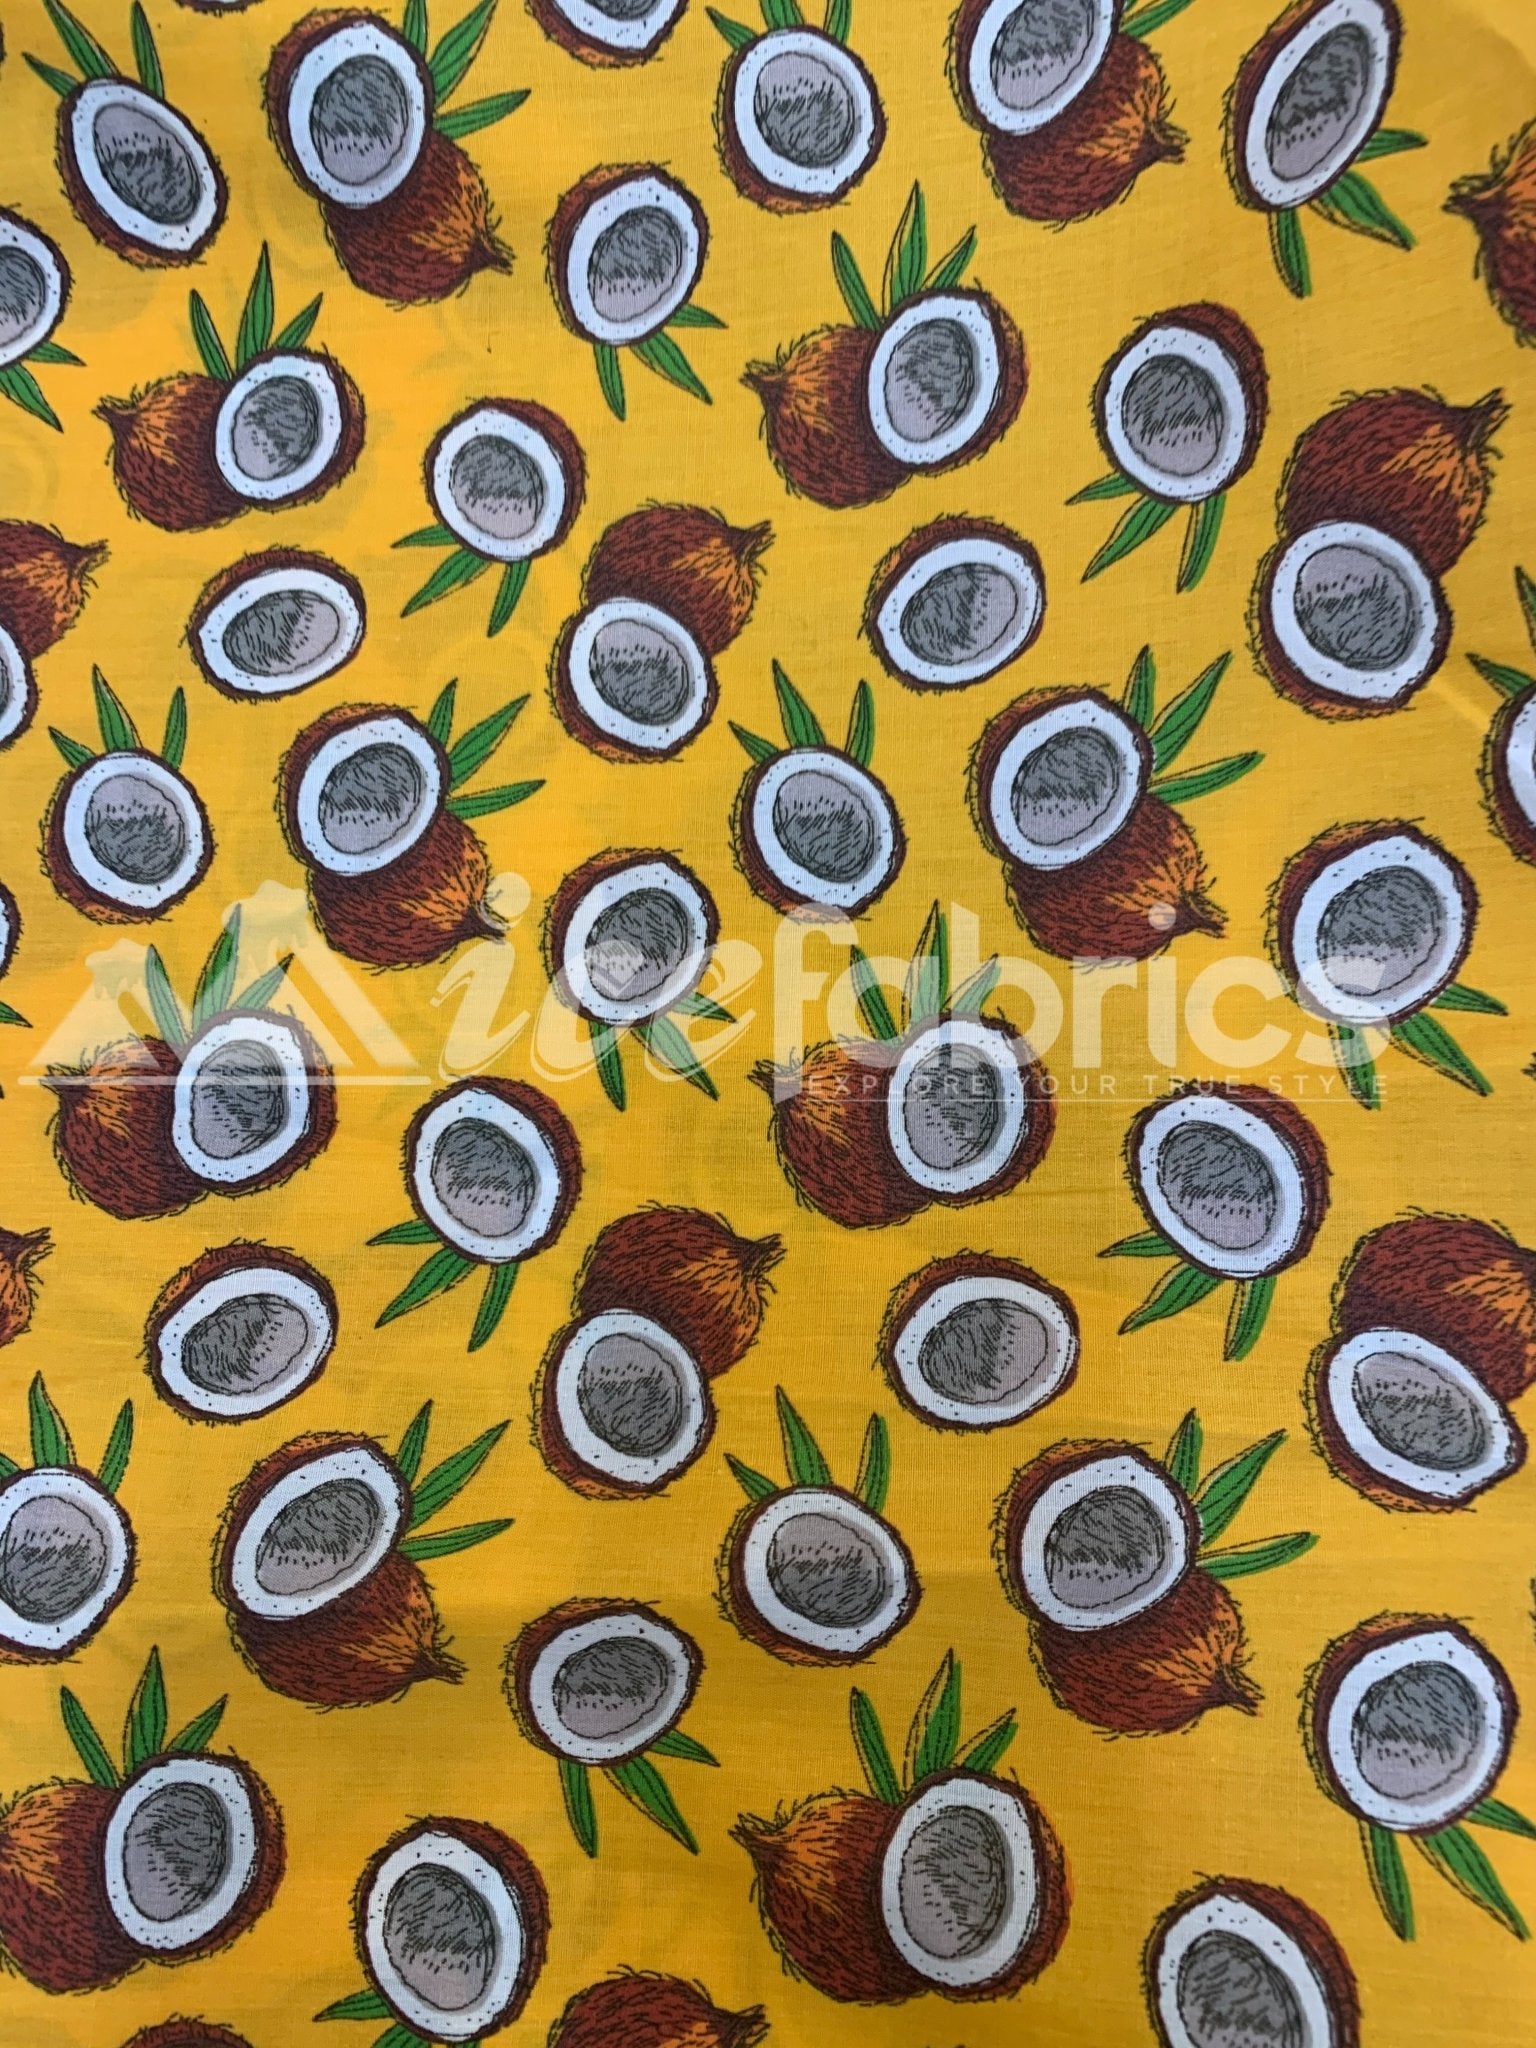 Fashion Coconut Print Poly Cotton Fabric By The Yard (Yellow, Blue)Cotton FabricICEFABRICICE FABRICSYellowFashion Coconut Print Poly Cotton Fabric By The Yard (Yellow, Blue) ICEFABRIC Yellow